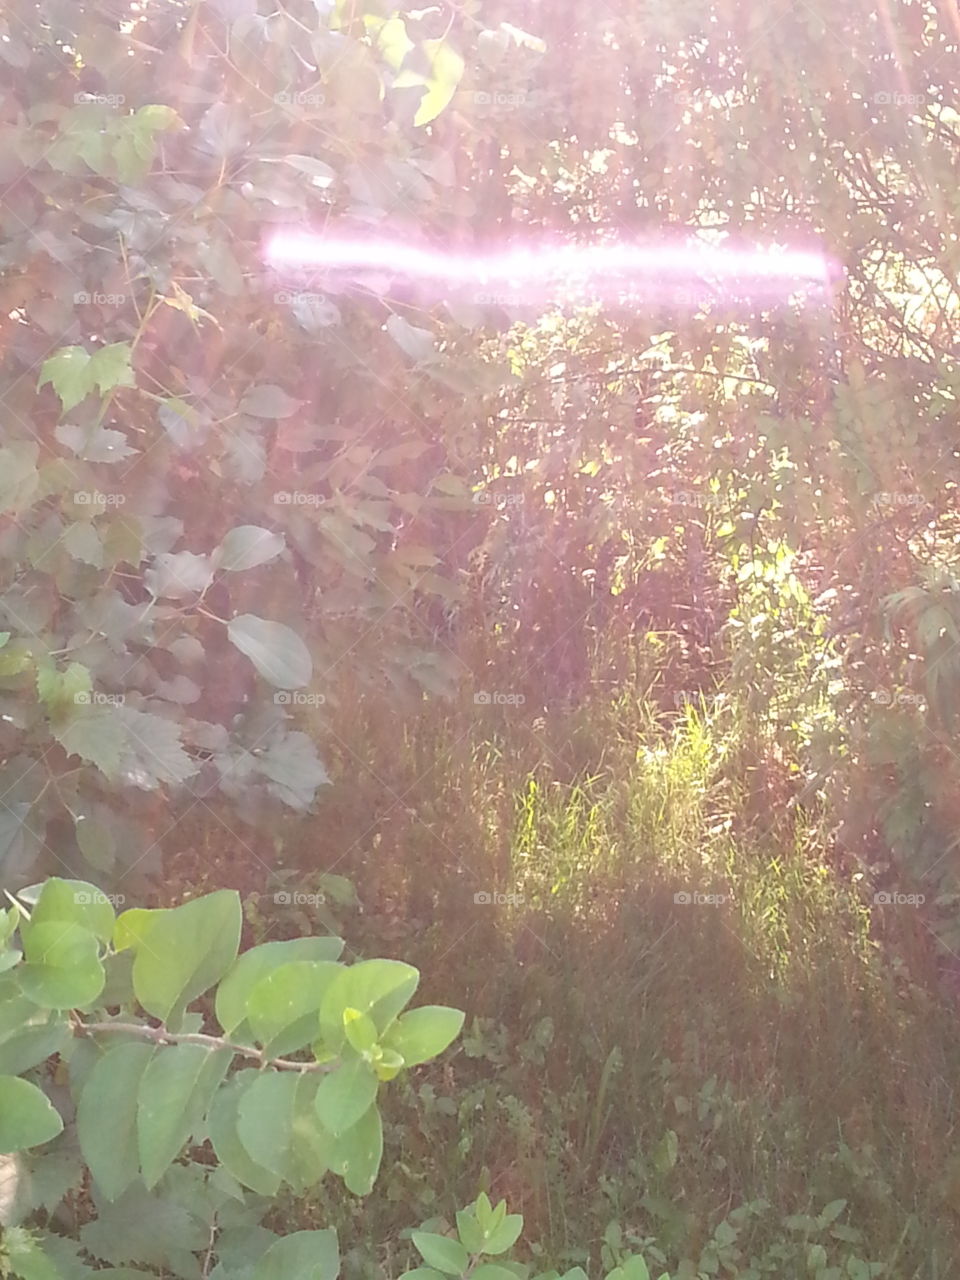 What is it?. Strange light showed up in this photo